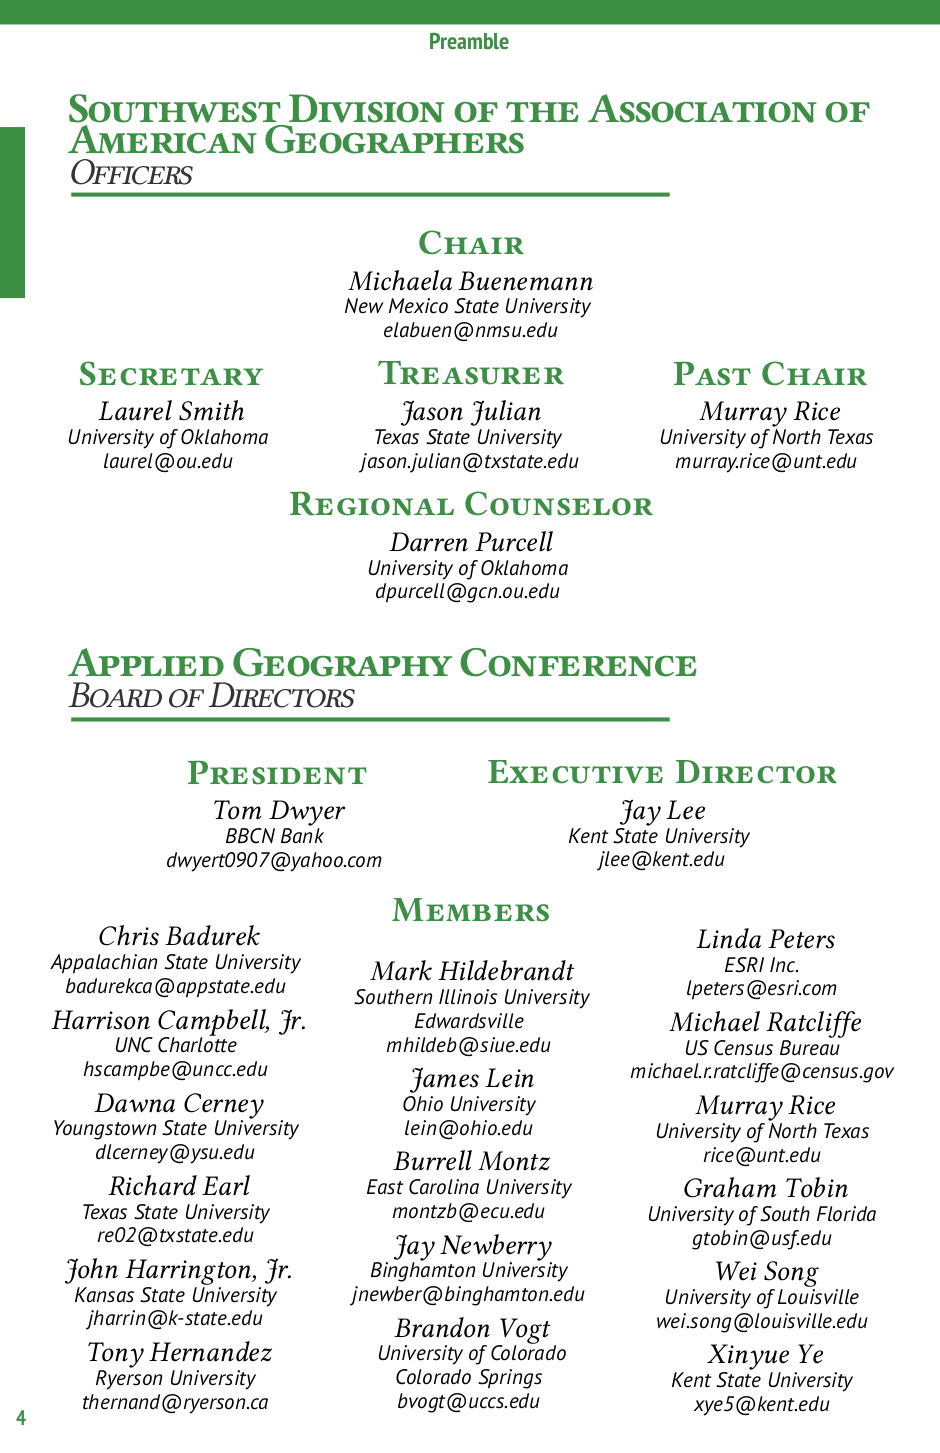 SWAAG/AGC 2015 conference program - Officer page